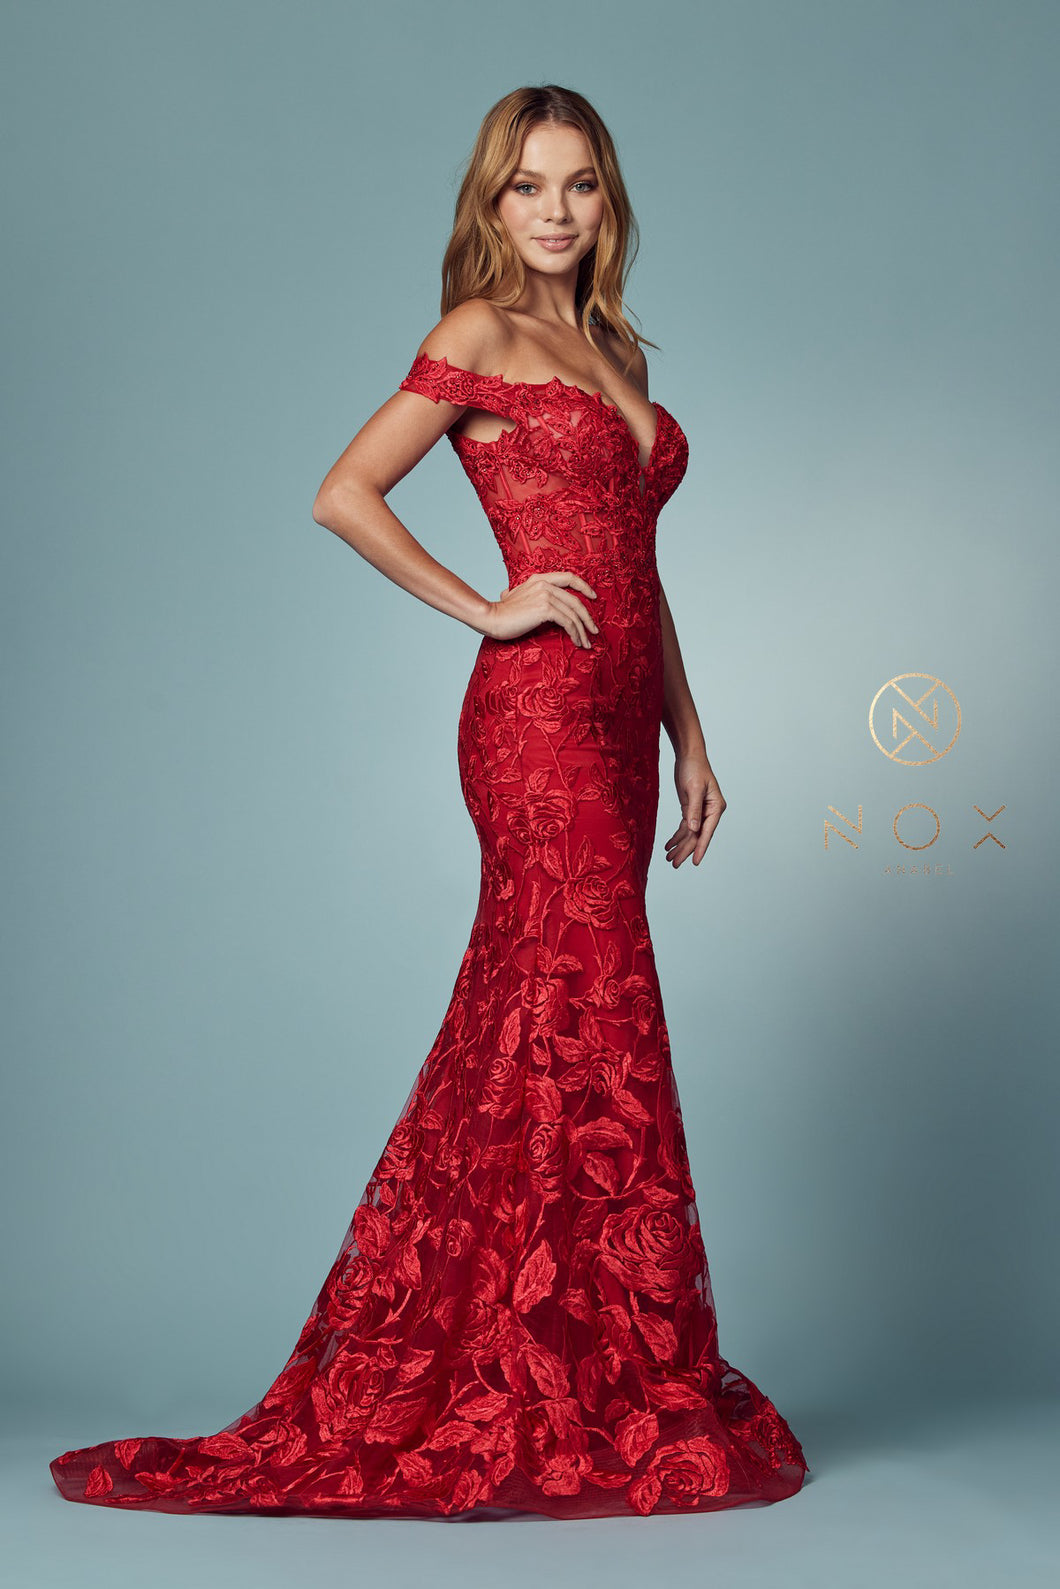 N C439 - Off The Shoulder Bead Embellished Lace Fit & Flare Prom Gown with Sheer Boned V-Neck Bodice & Train Dresses Nox 4 RED 